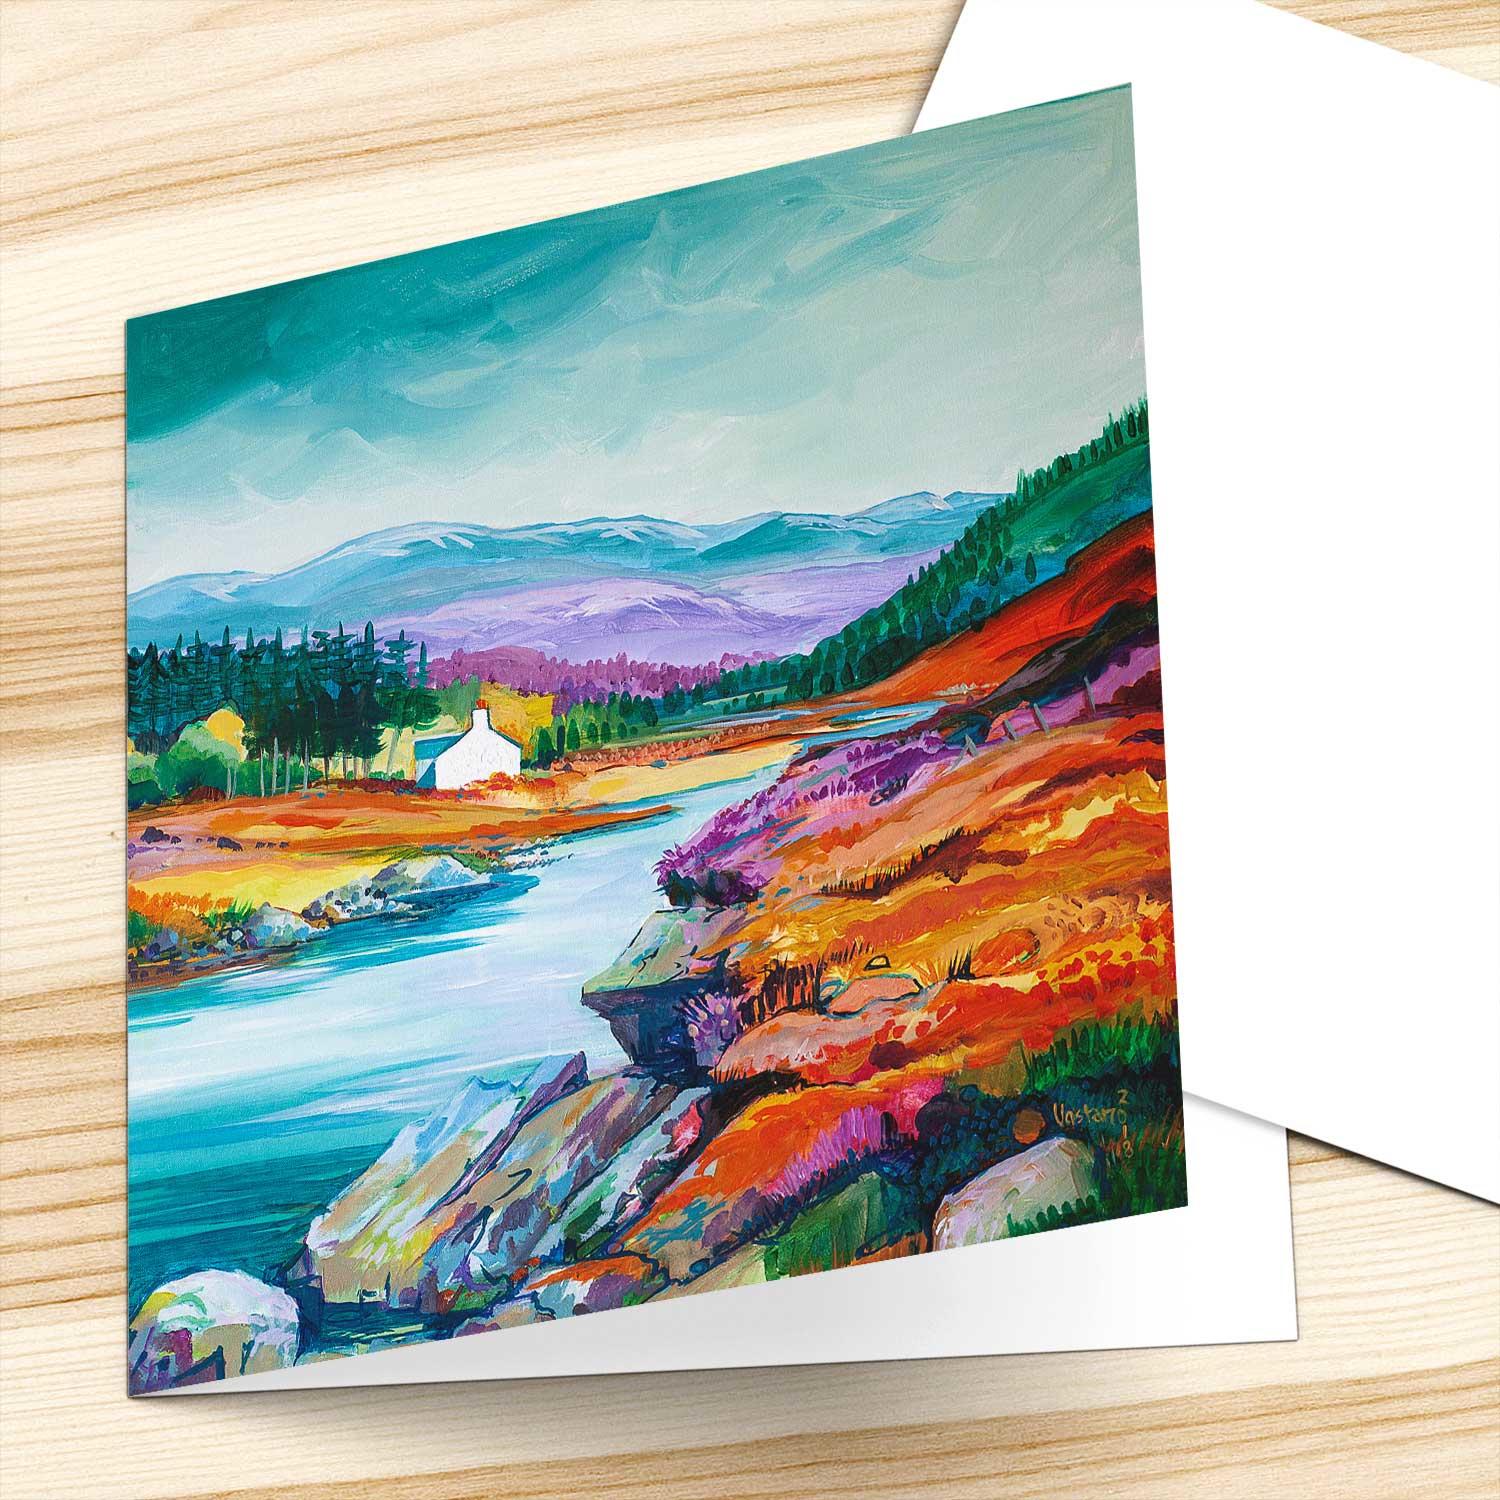 From the Pony Bridge, Glenfeshie  Greeting Card from an original painting by artist Ann Vastano